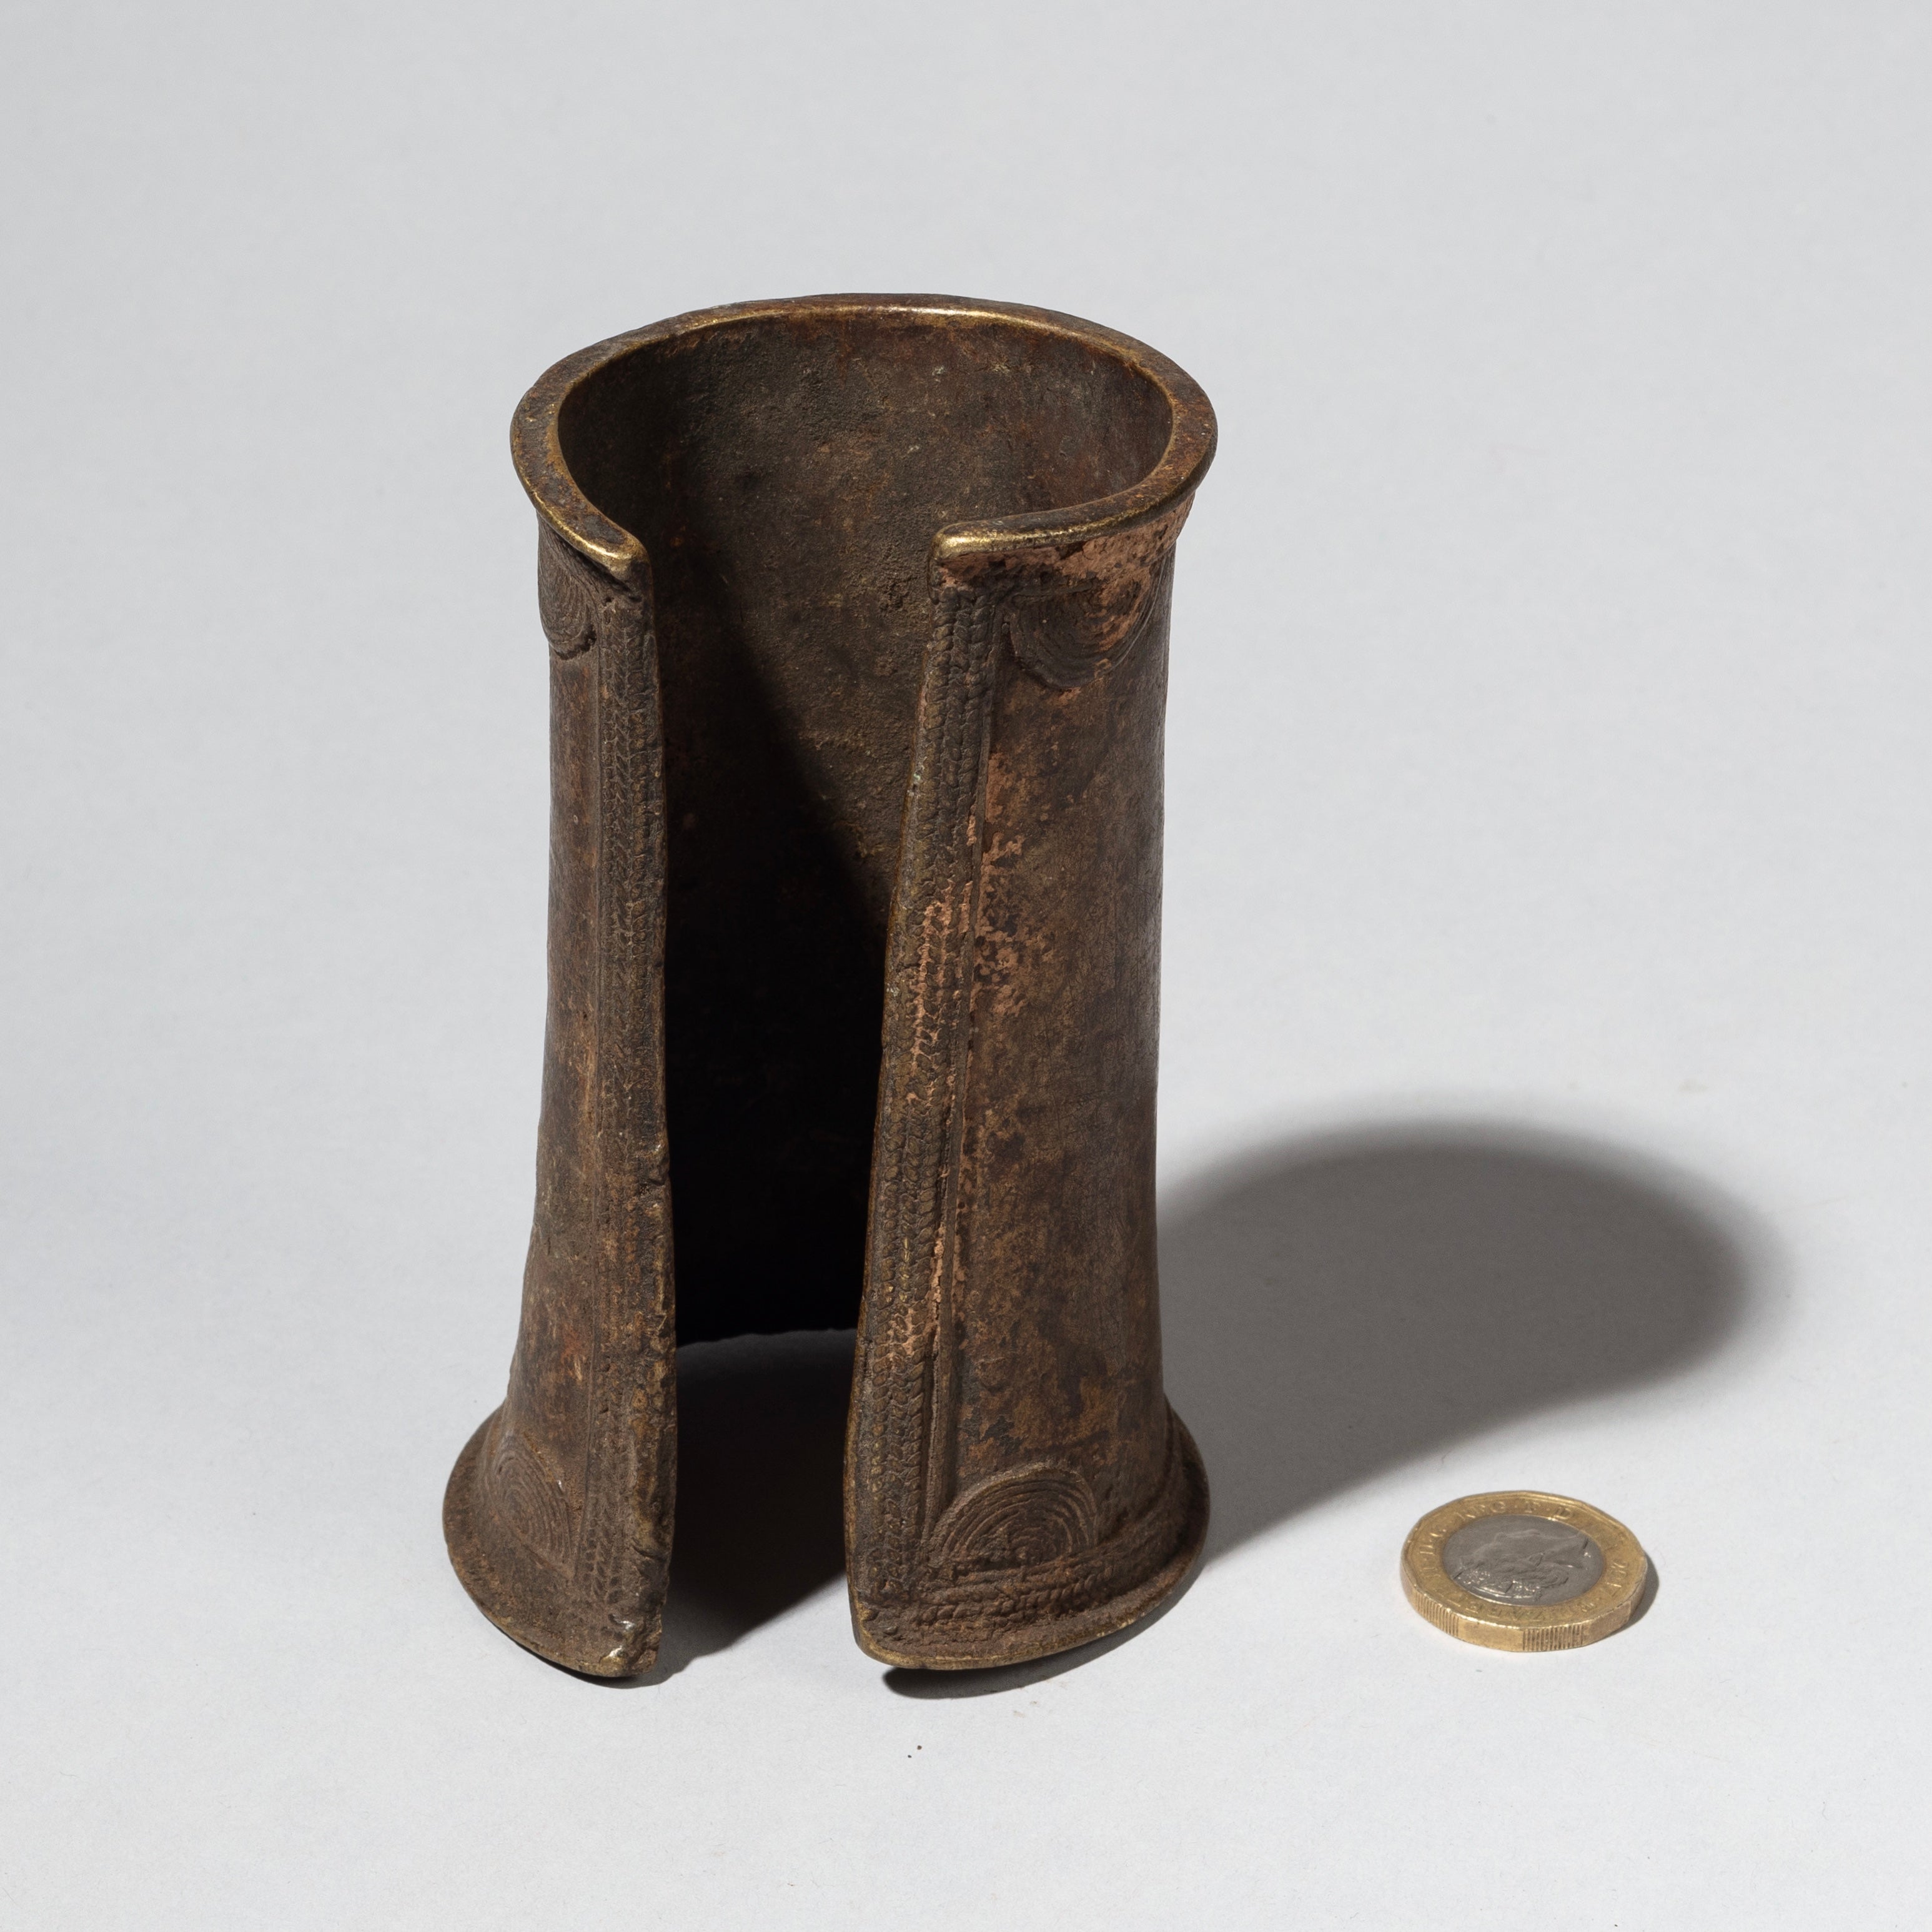 A SOPHISTICATED BRONZE CUFF FROM THE KIRDI TRIBE OF CAMEROON W.AFRICA( No 2292)